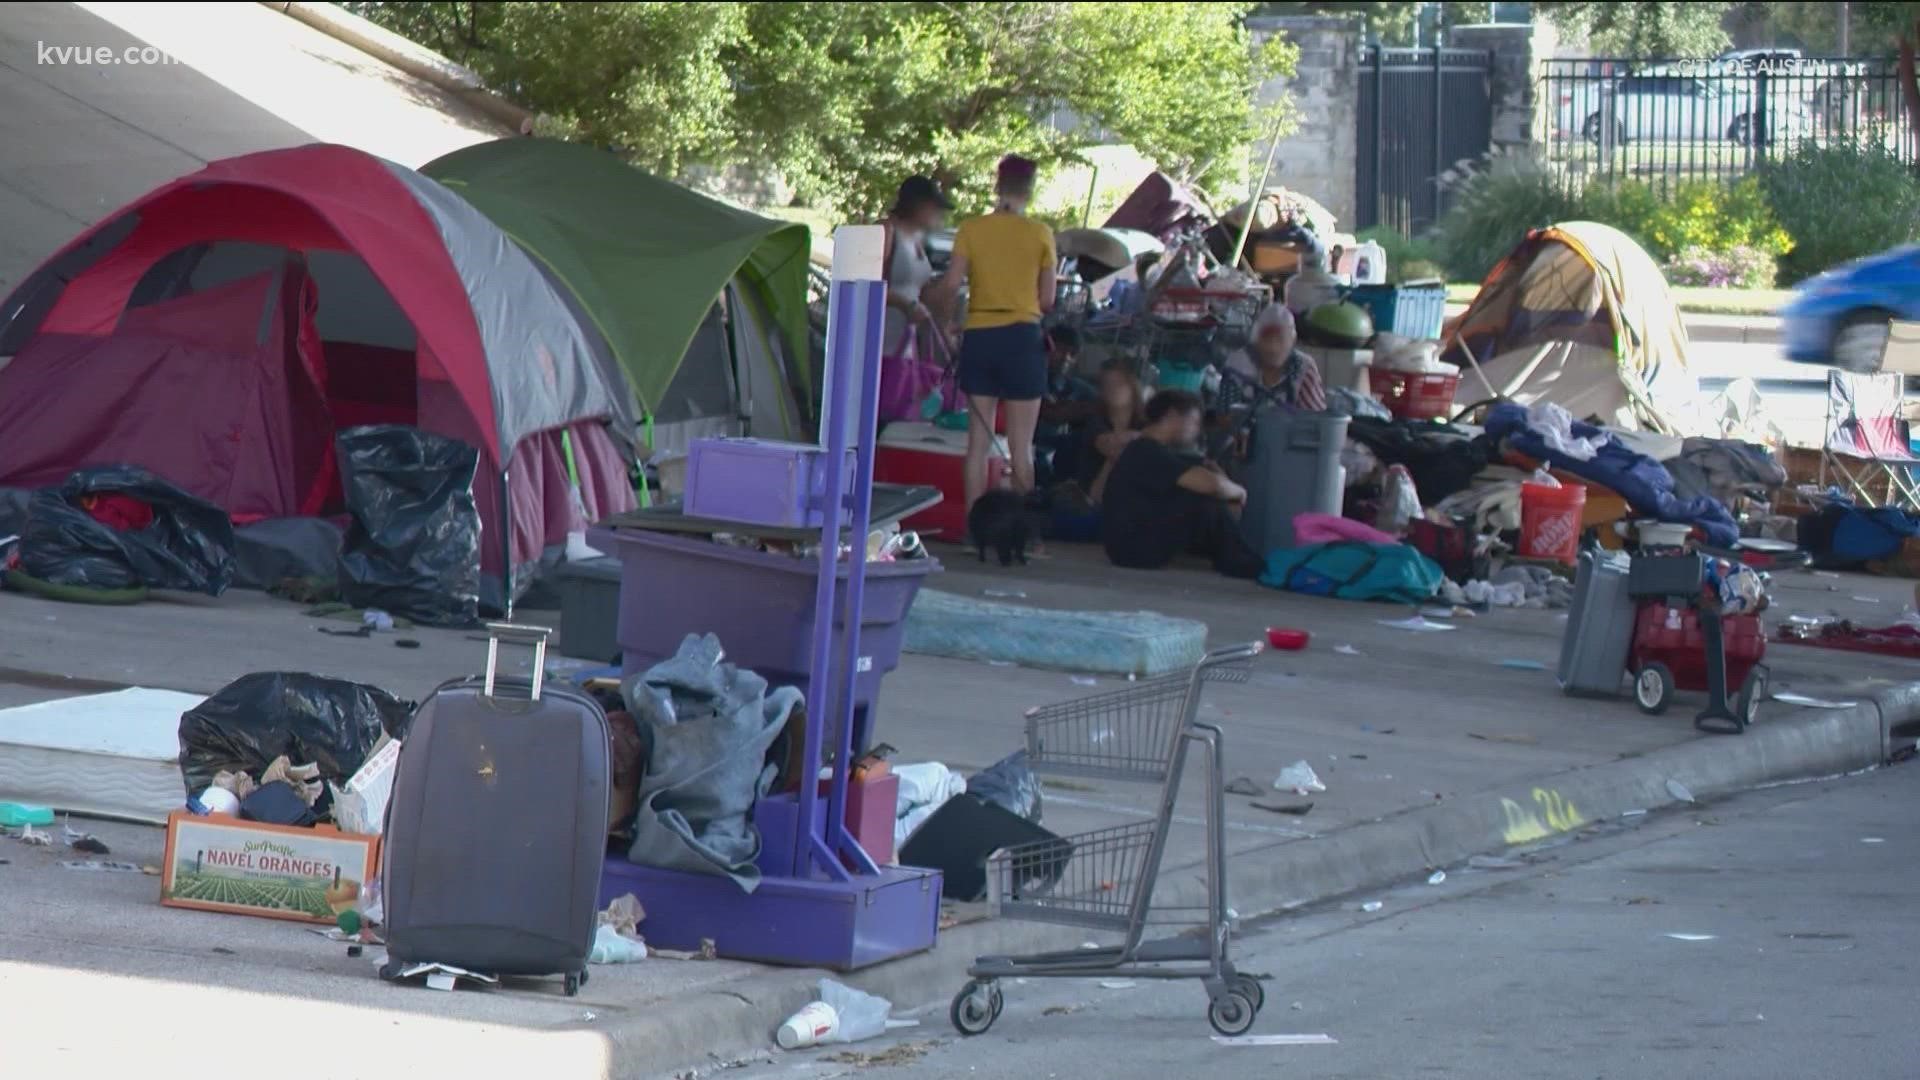 "House America" is a new nationwide initiative aimed at addressing the homelessness crisis. And Austin Mayor Steve Adler is jumping in on the effort.